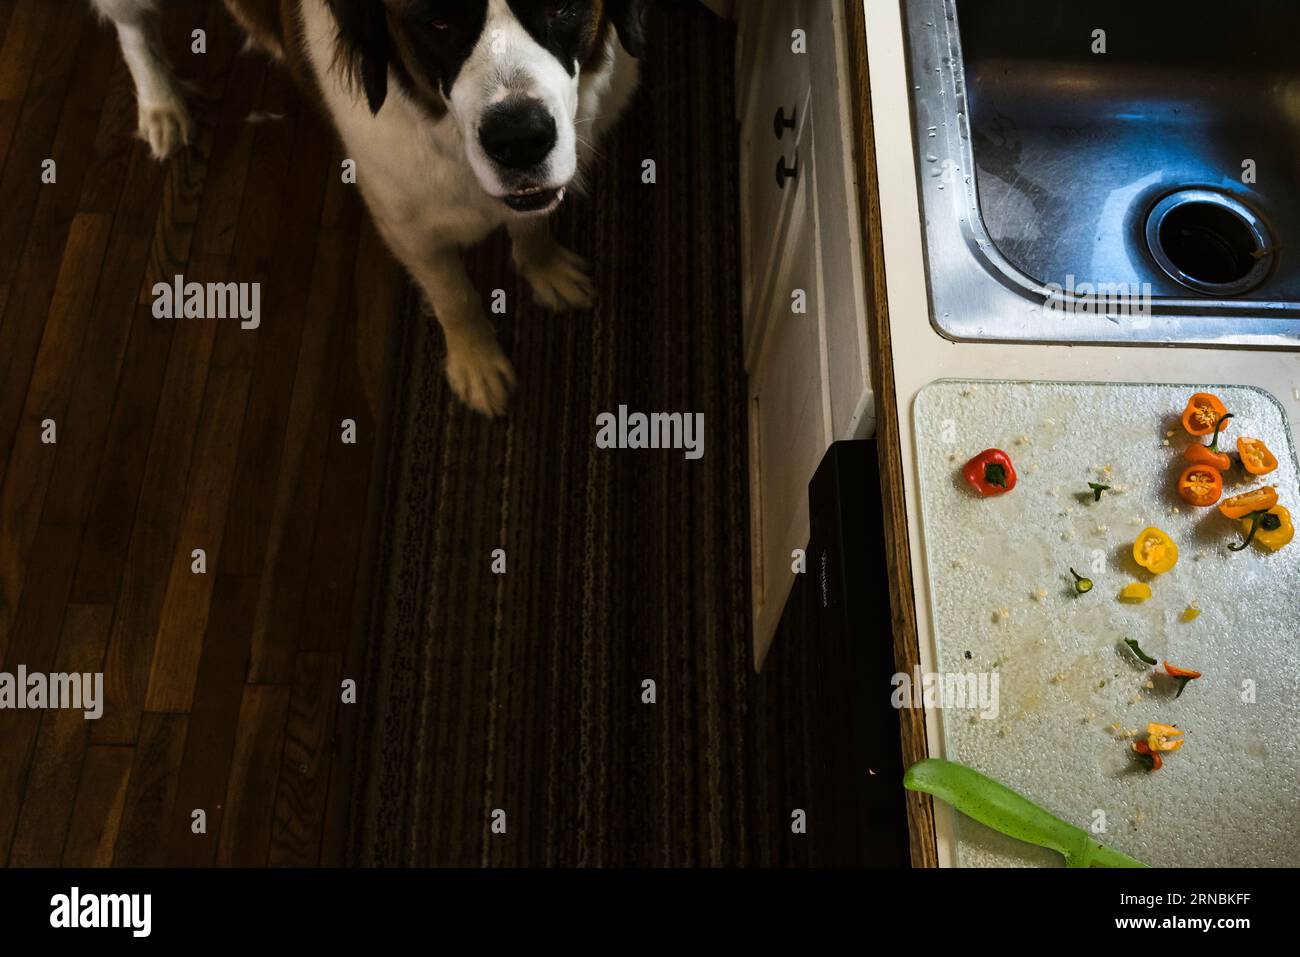 Dog looks up in kitchen waiting for peppers on cutting board by sink Stock Photo